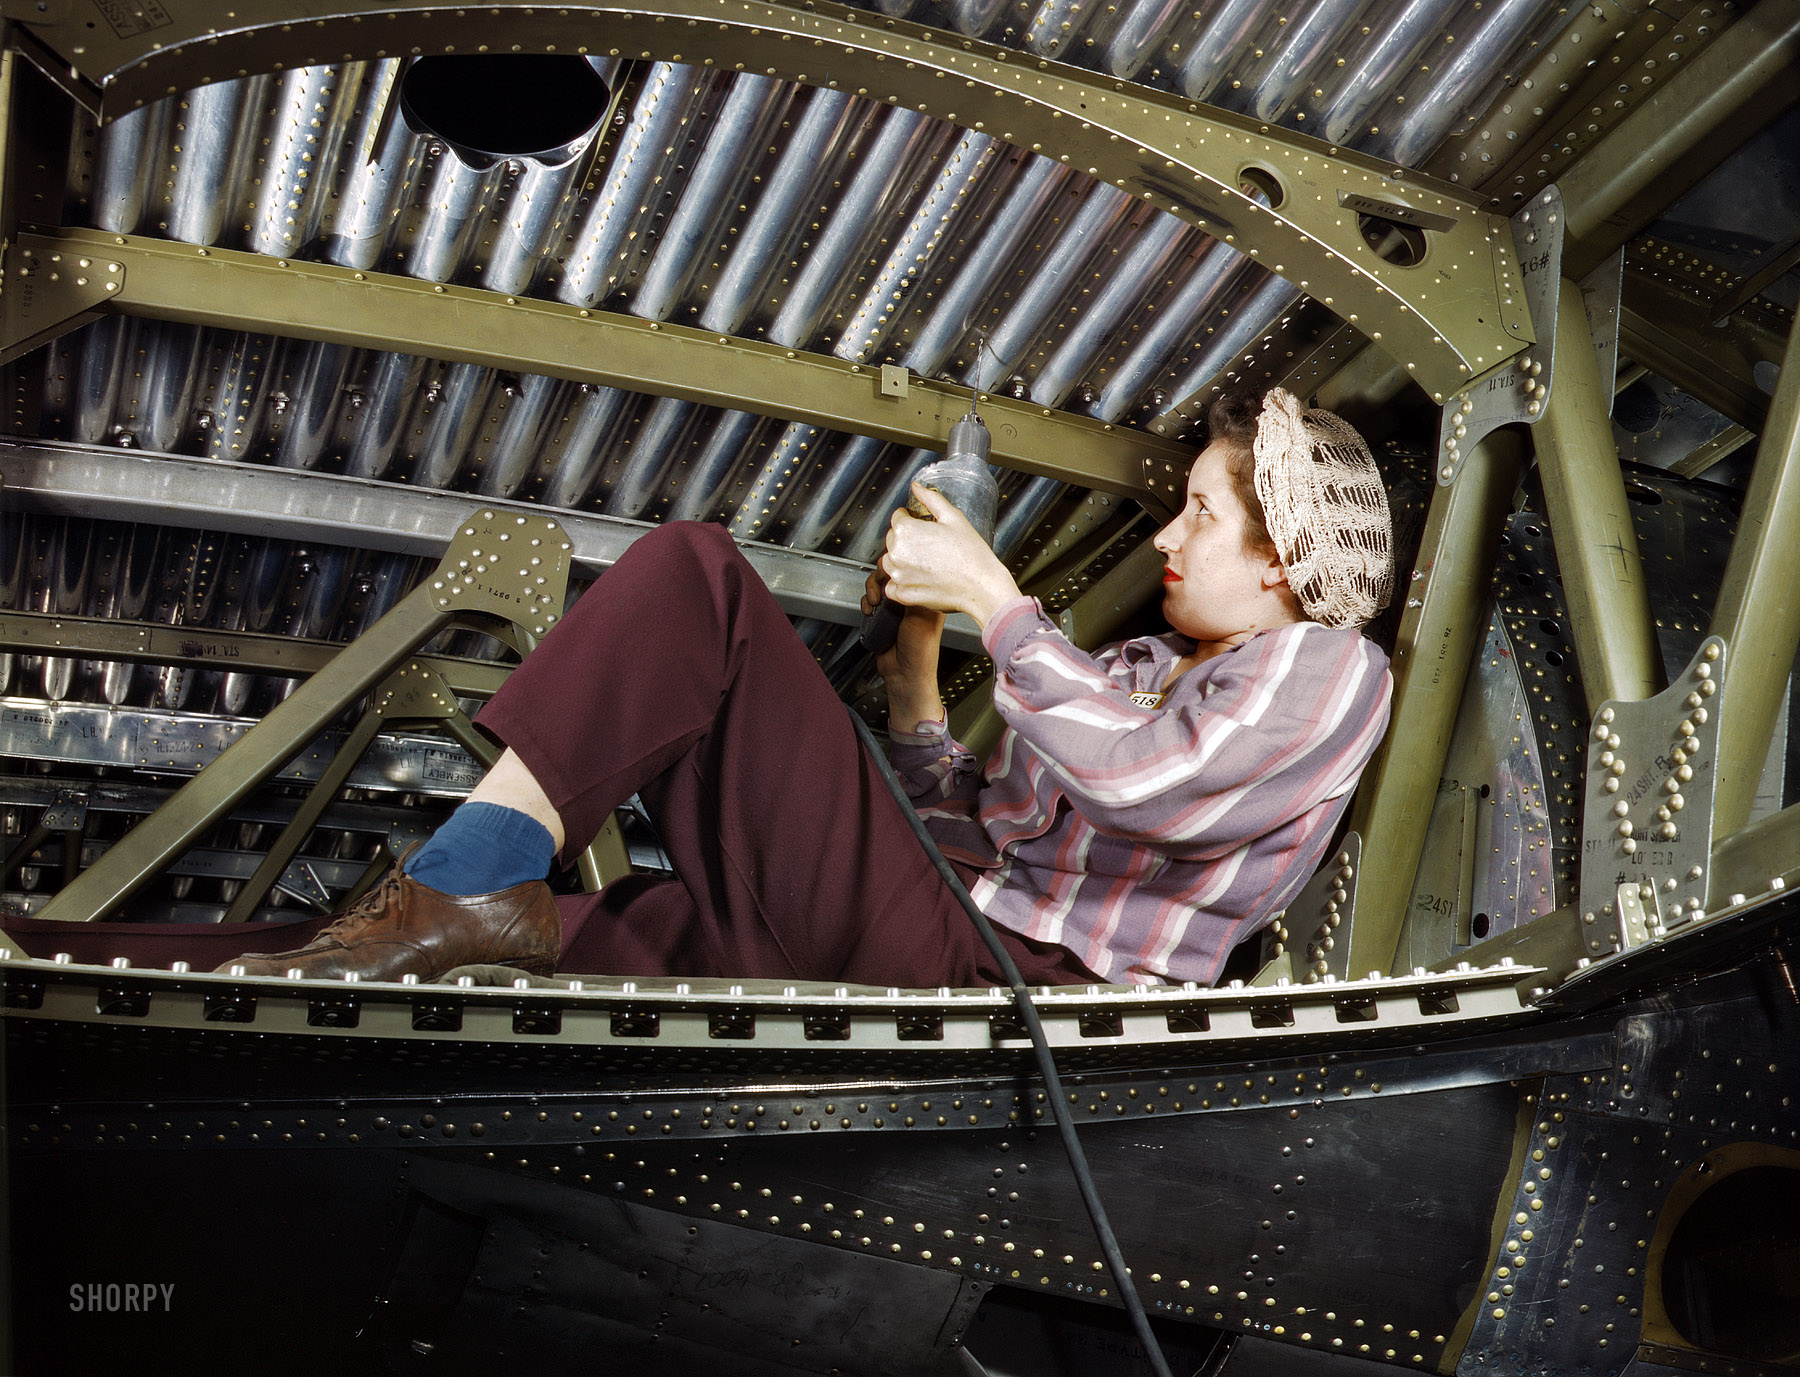 October 1942. "Douglas Aircraft plant at Long Beach, California. An A-20 bomber being riveted by a woman worker." (With, yes, a power drill.) 4x5 Kodachrome transparency by Alfred Palmer, Office of War Information. View full size.